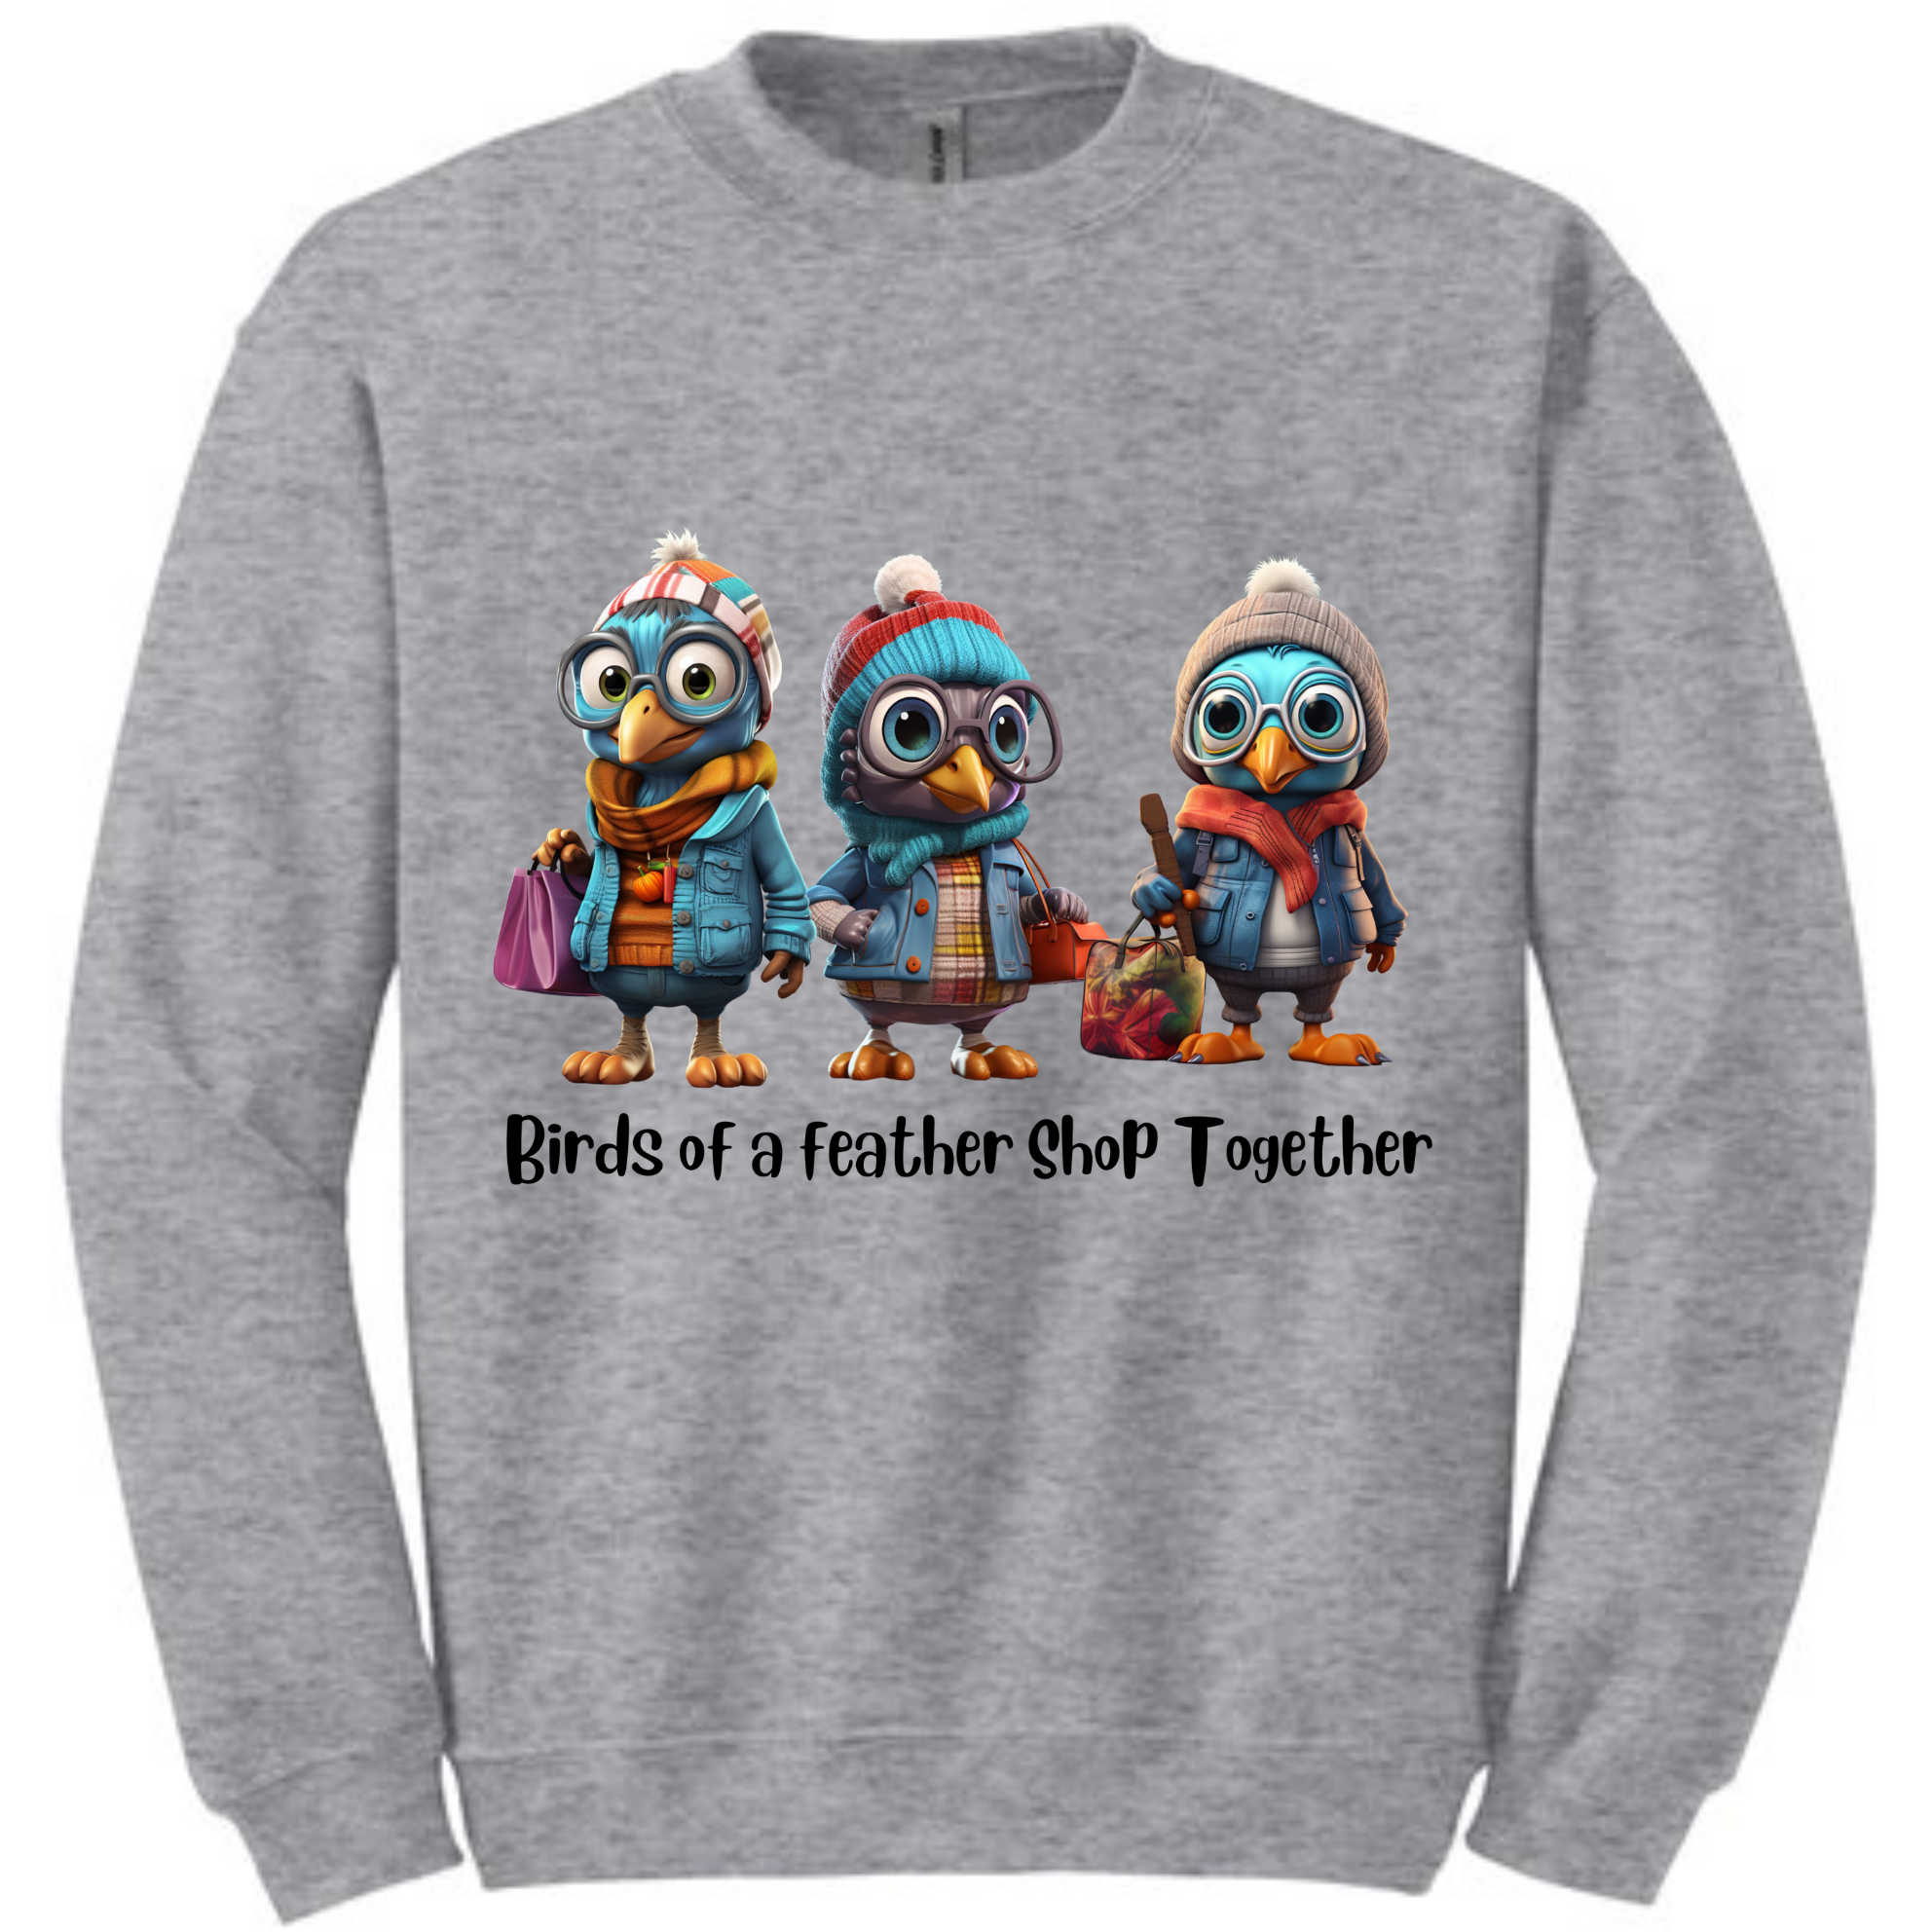 Birds of a Feather Shop Together Sweatshirt Sweatshirt Rose’s Colored Designs Small  